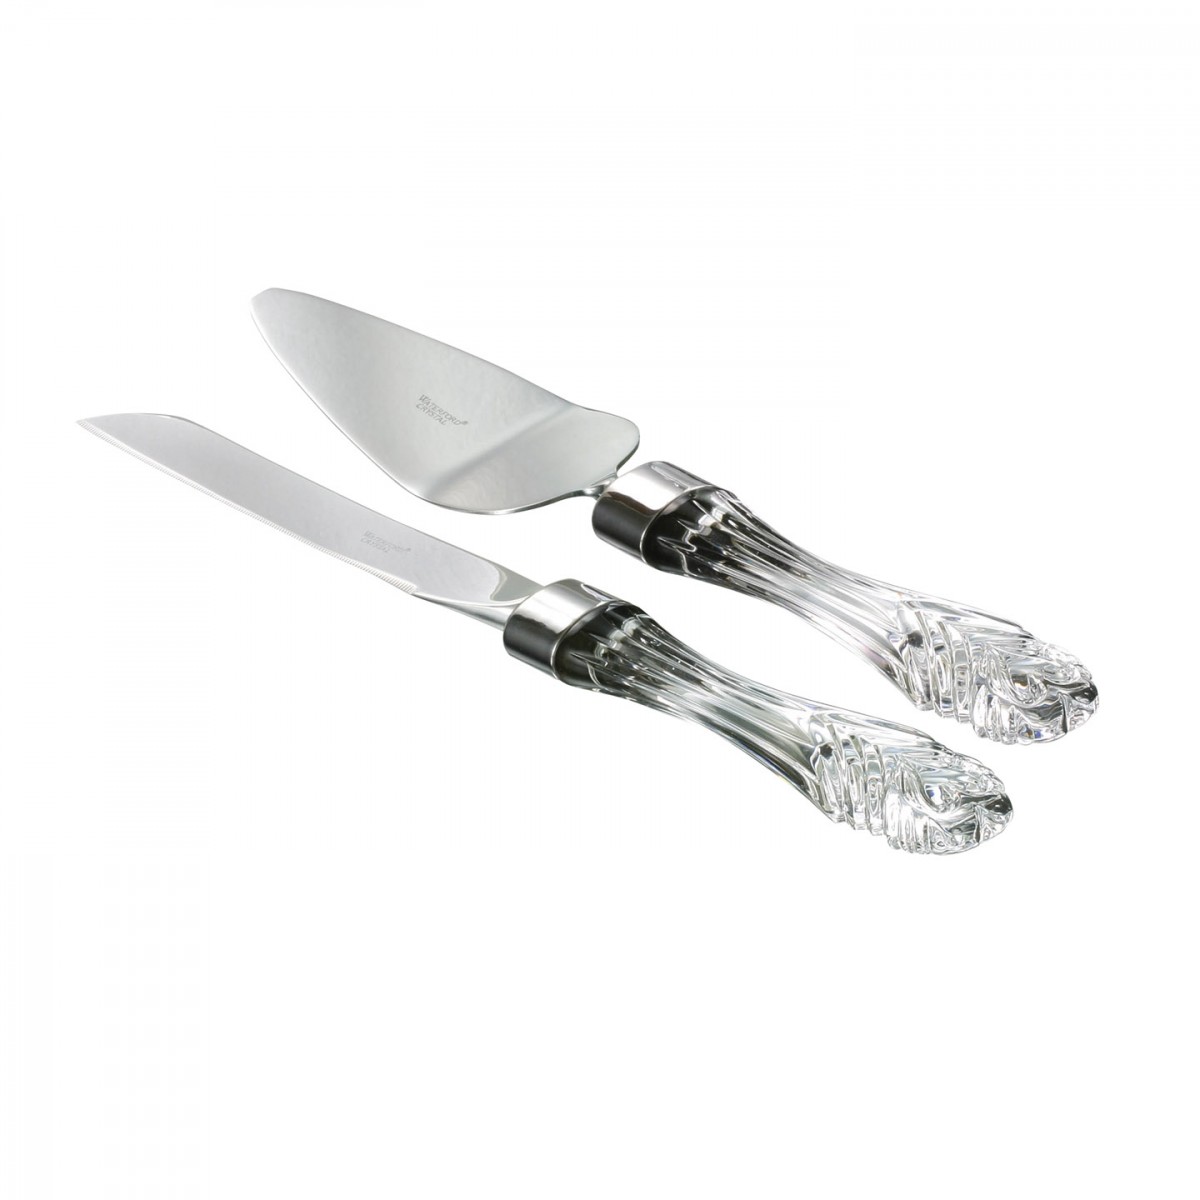 Waterford Wedding Cake Knife and Server, Crystal and Stainless Set